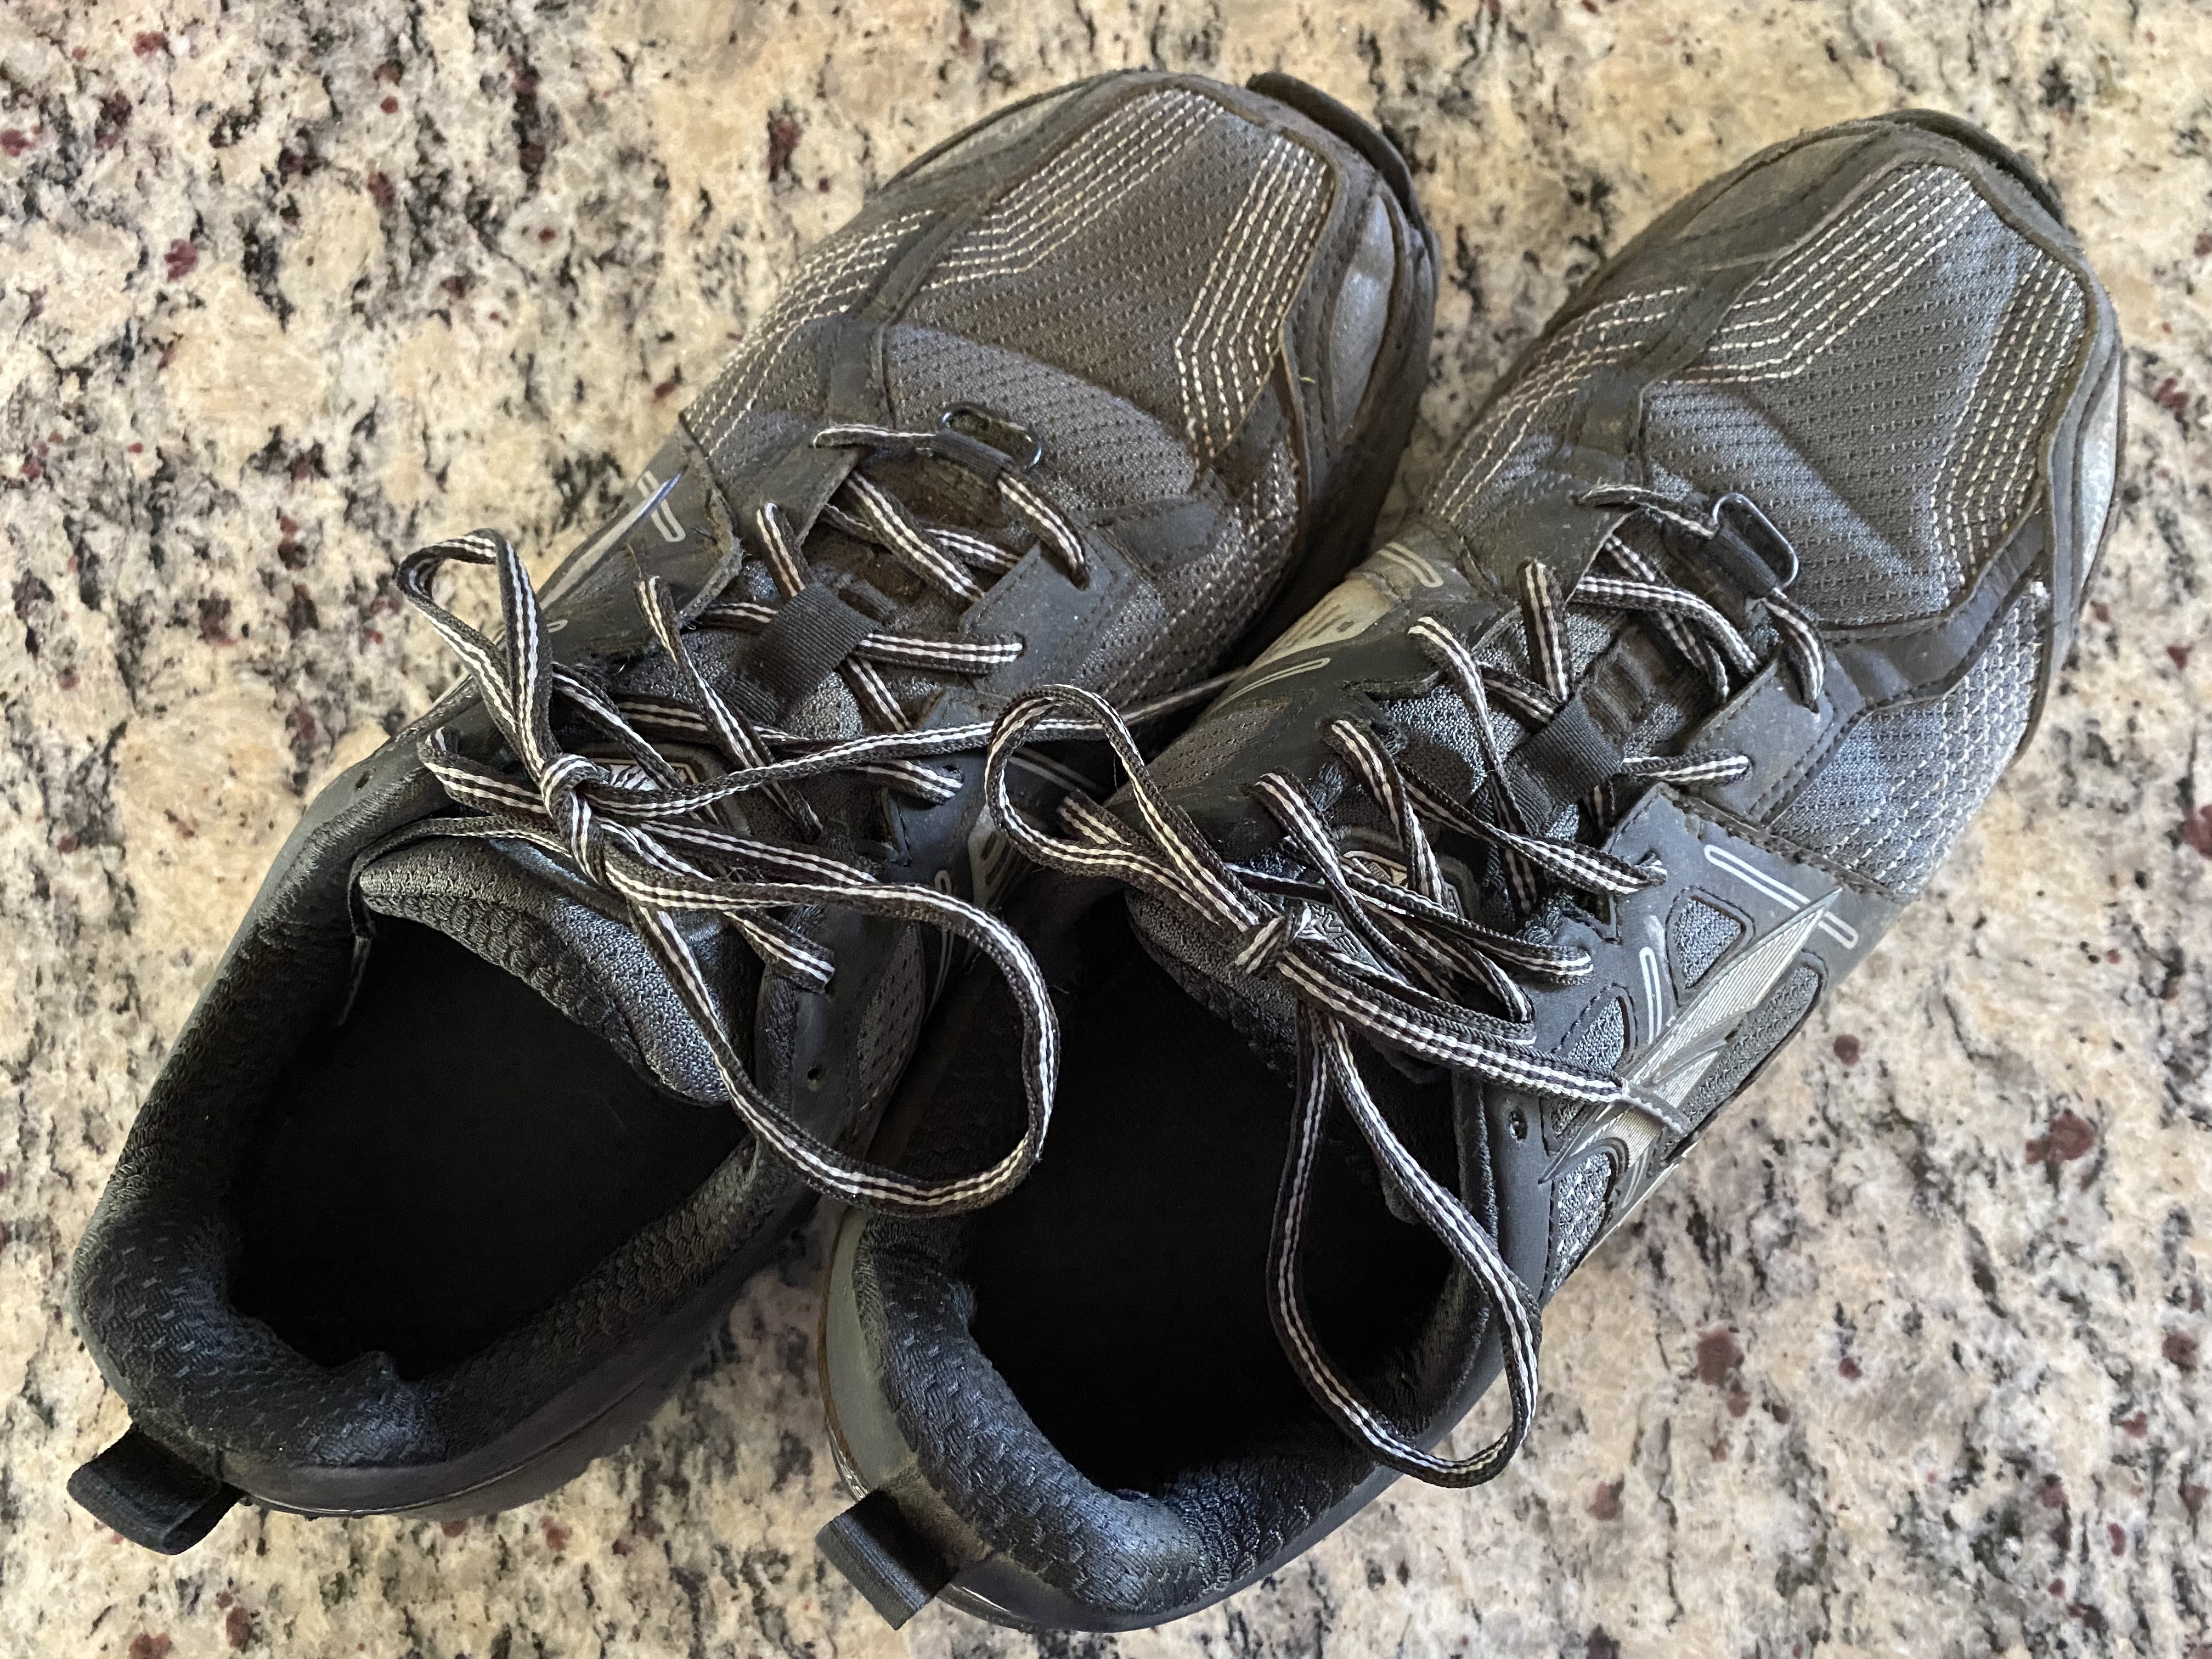 Review of Altra Lone Peak Trail Runners: a Good Choice for Day Hikes and Lightweight Backpacking